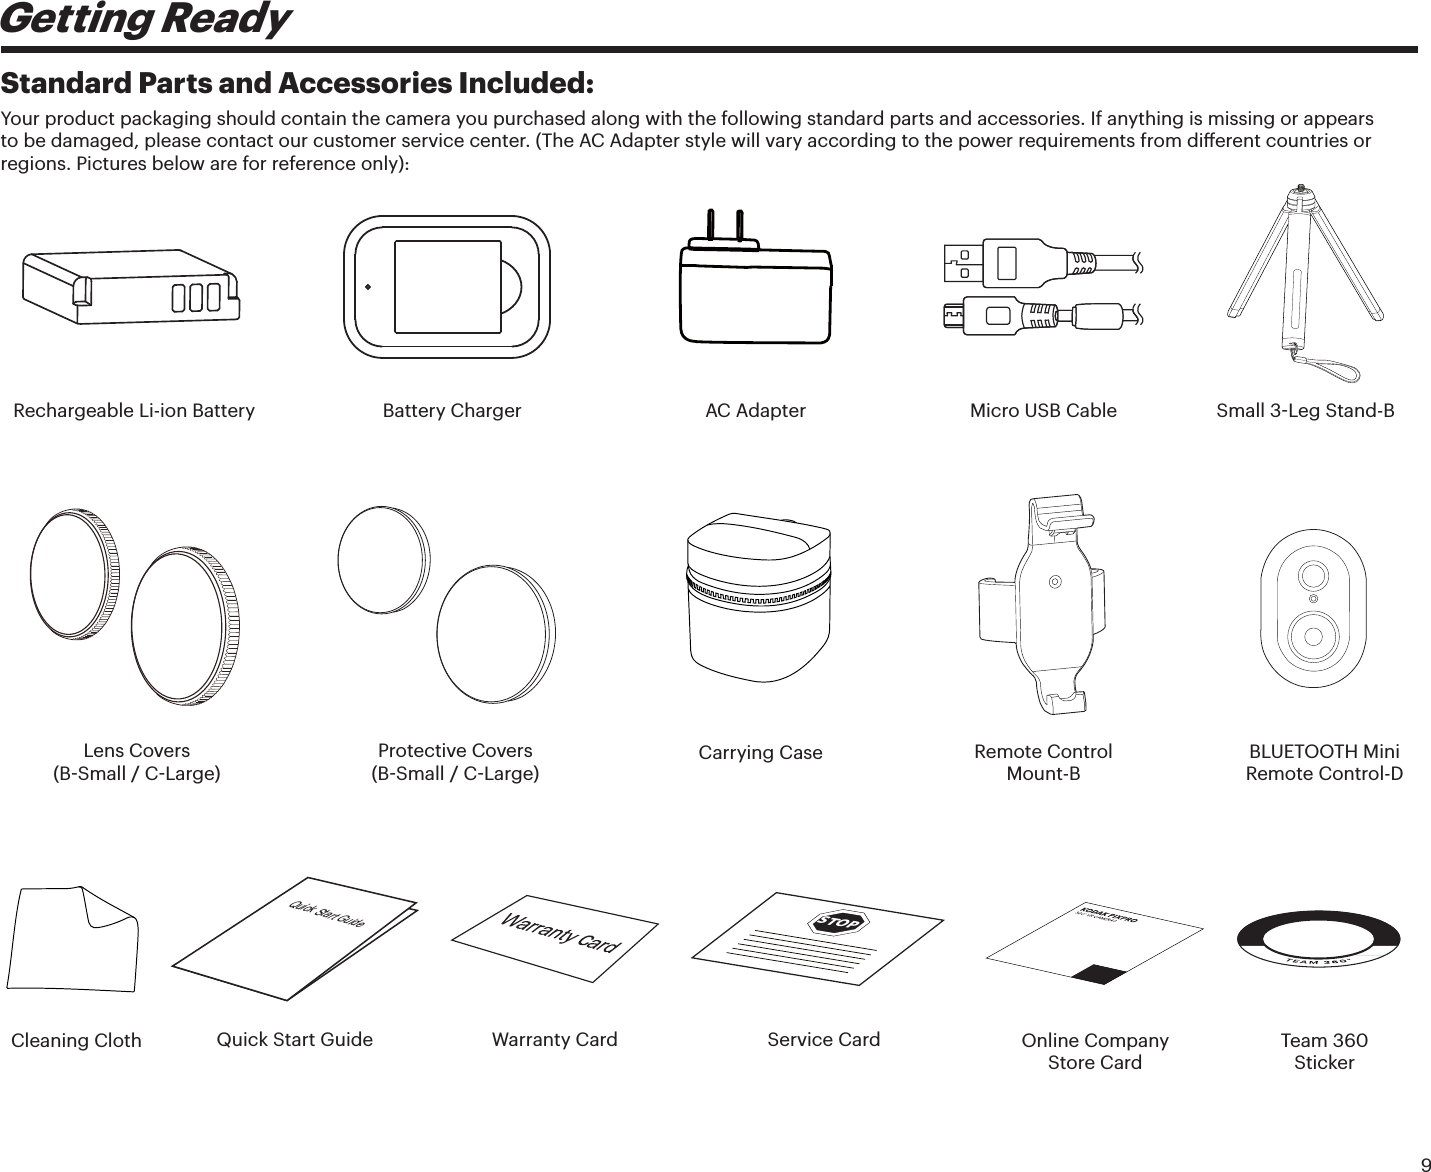 9Getting ReadyStandard Parts and Accessories Included:Your product packaging should contain the camera you purchased along with the following standard parts and accessories. If anything is missing or appears to be damaged, please contact our customer service center. (The AC Adapter style will vary according to the power requirements from dierent countries or regions. Pictures below are for reference only):Warranty CardQuick Start GuideQuick Start GuideSTOPService CardLens Covers  (BSmall CLarge)Protective Covers (BSmallCLarge)Rechargeable Li-ion Battery Micro USB CableBattery Charger AC AdapterCarrying CaseCleaning ClothSmall 3Leg Stand-BRemote Control Mount-BOnline Company Store CardTeam 360 StickerBLUETOOTH Mini Remote Control-D